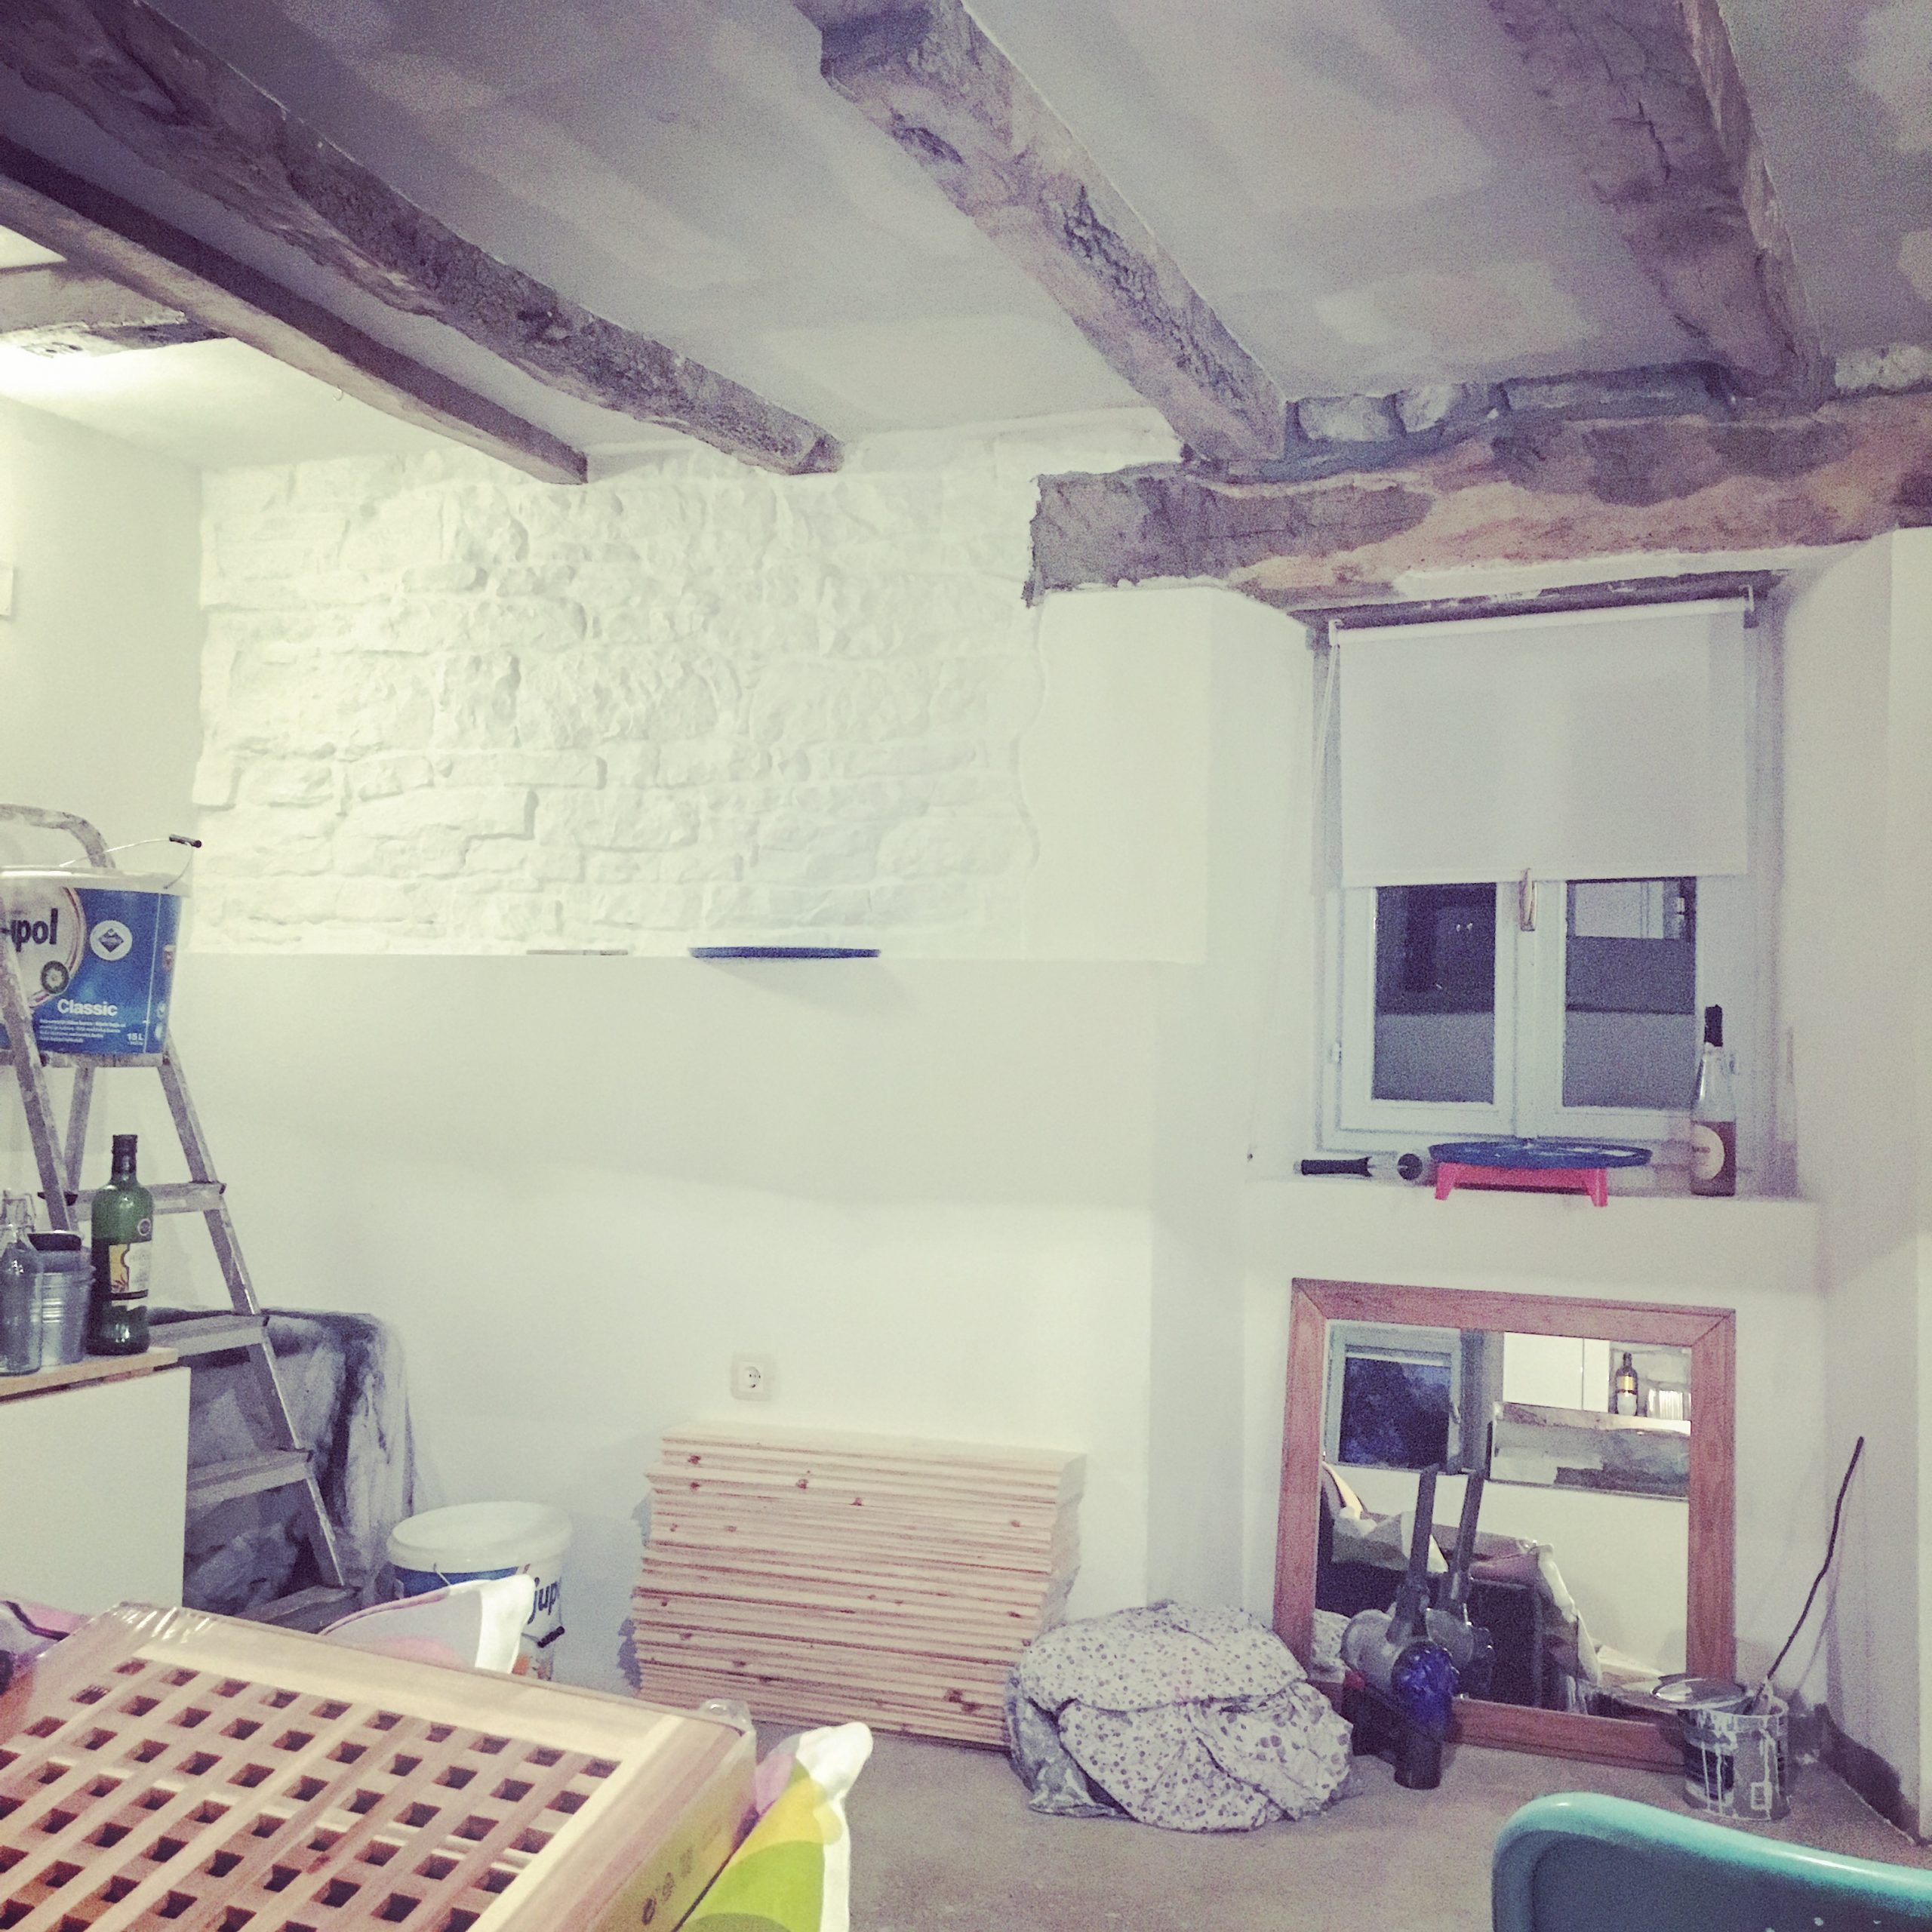 The start of the bare walls & ceiling turning white...